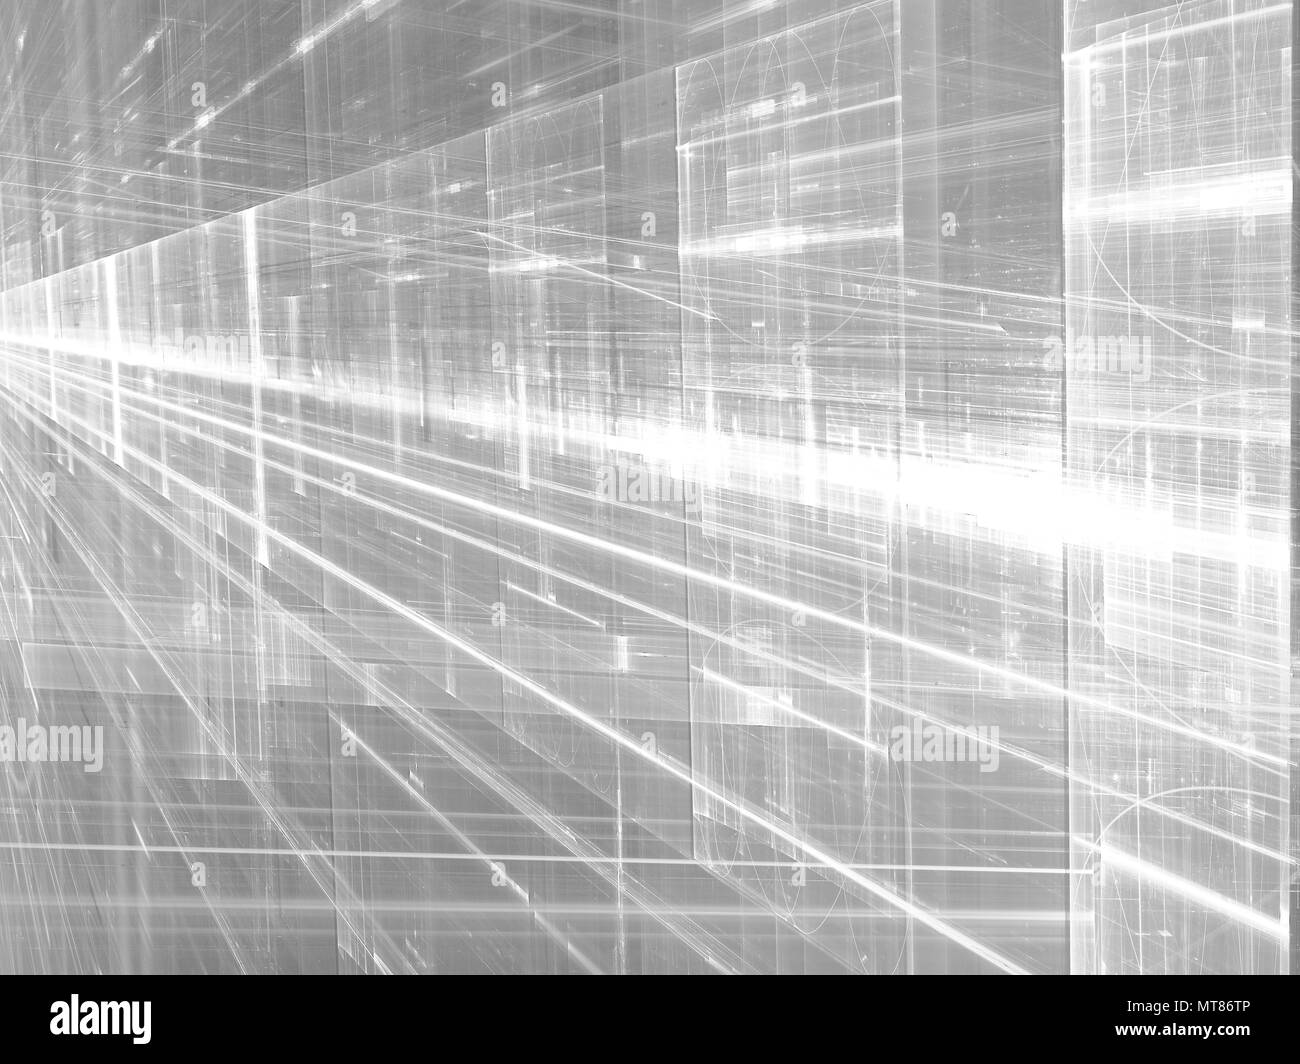 Glowing way - abstract digitally generated image Stock Photo